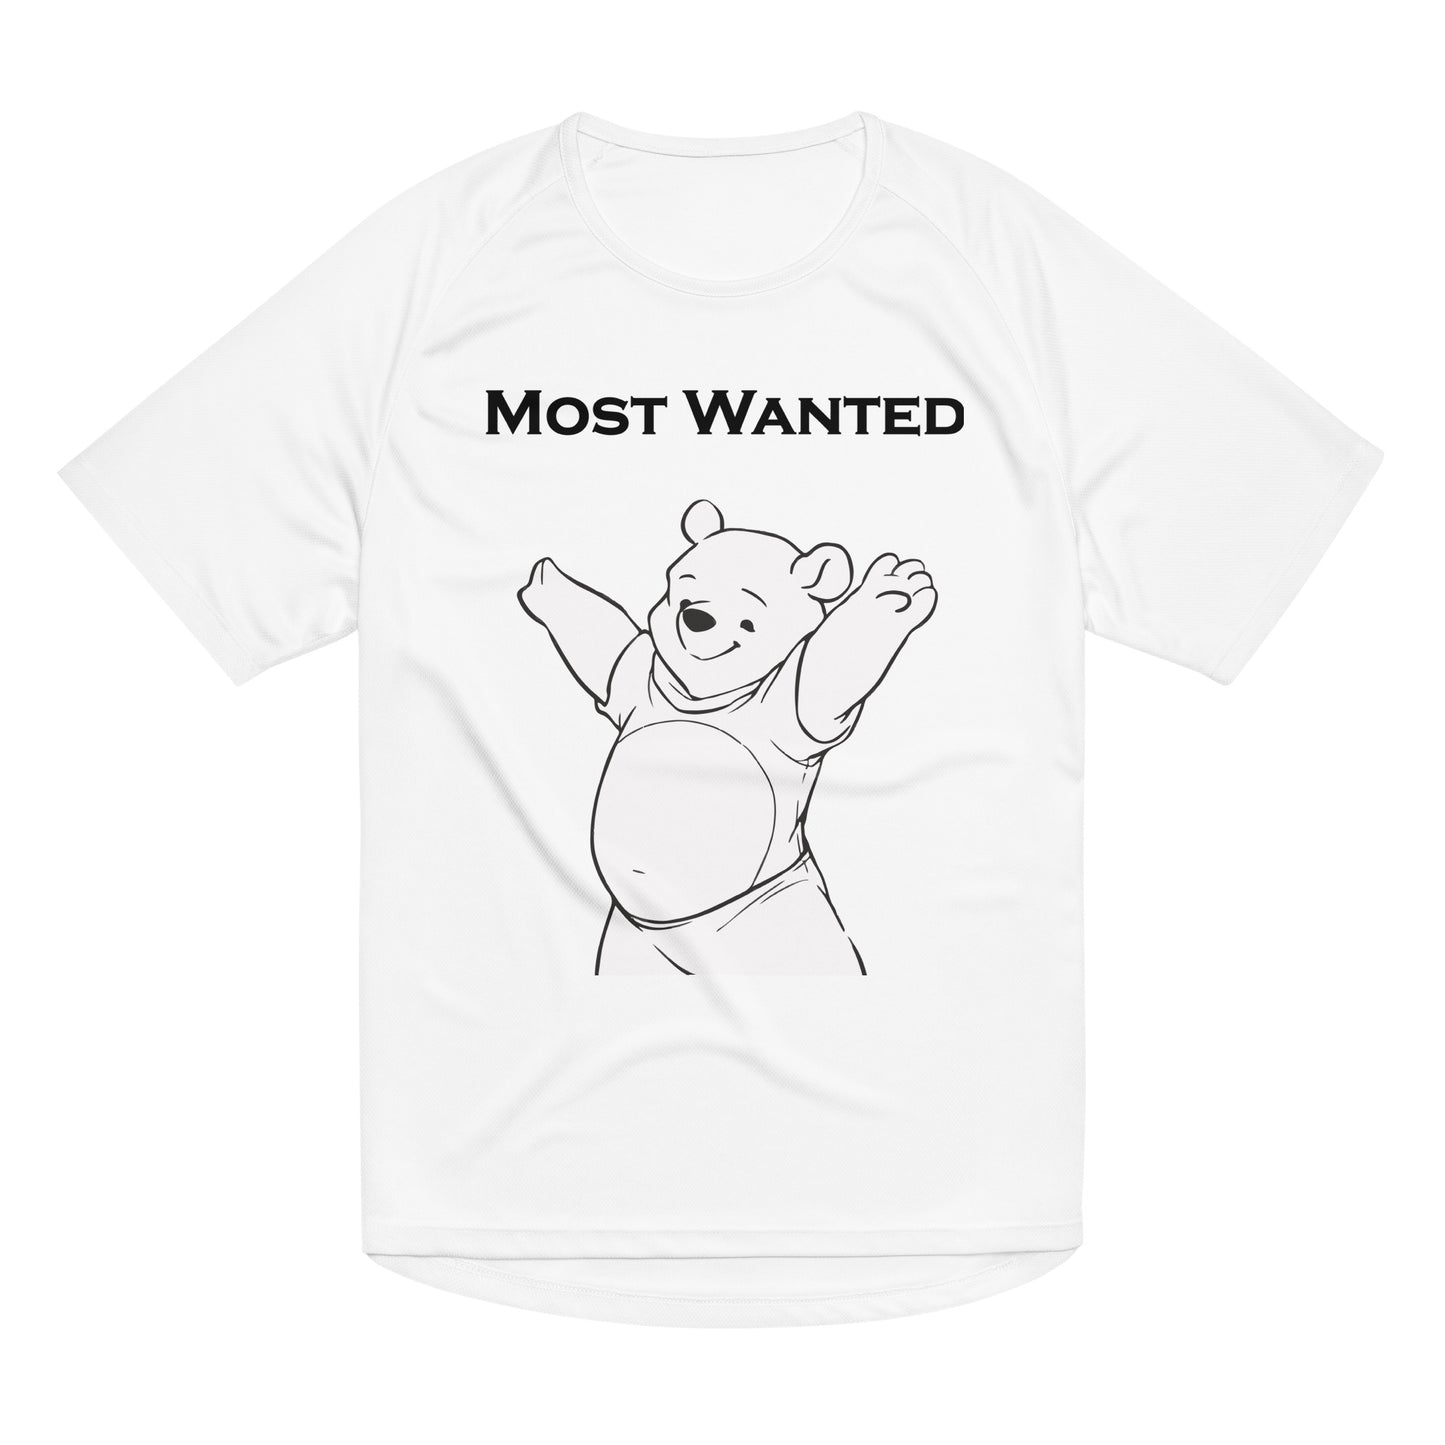 Winnie the Pooh #2 (Most Wanted)